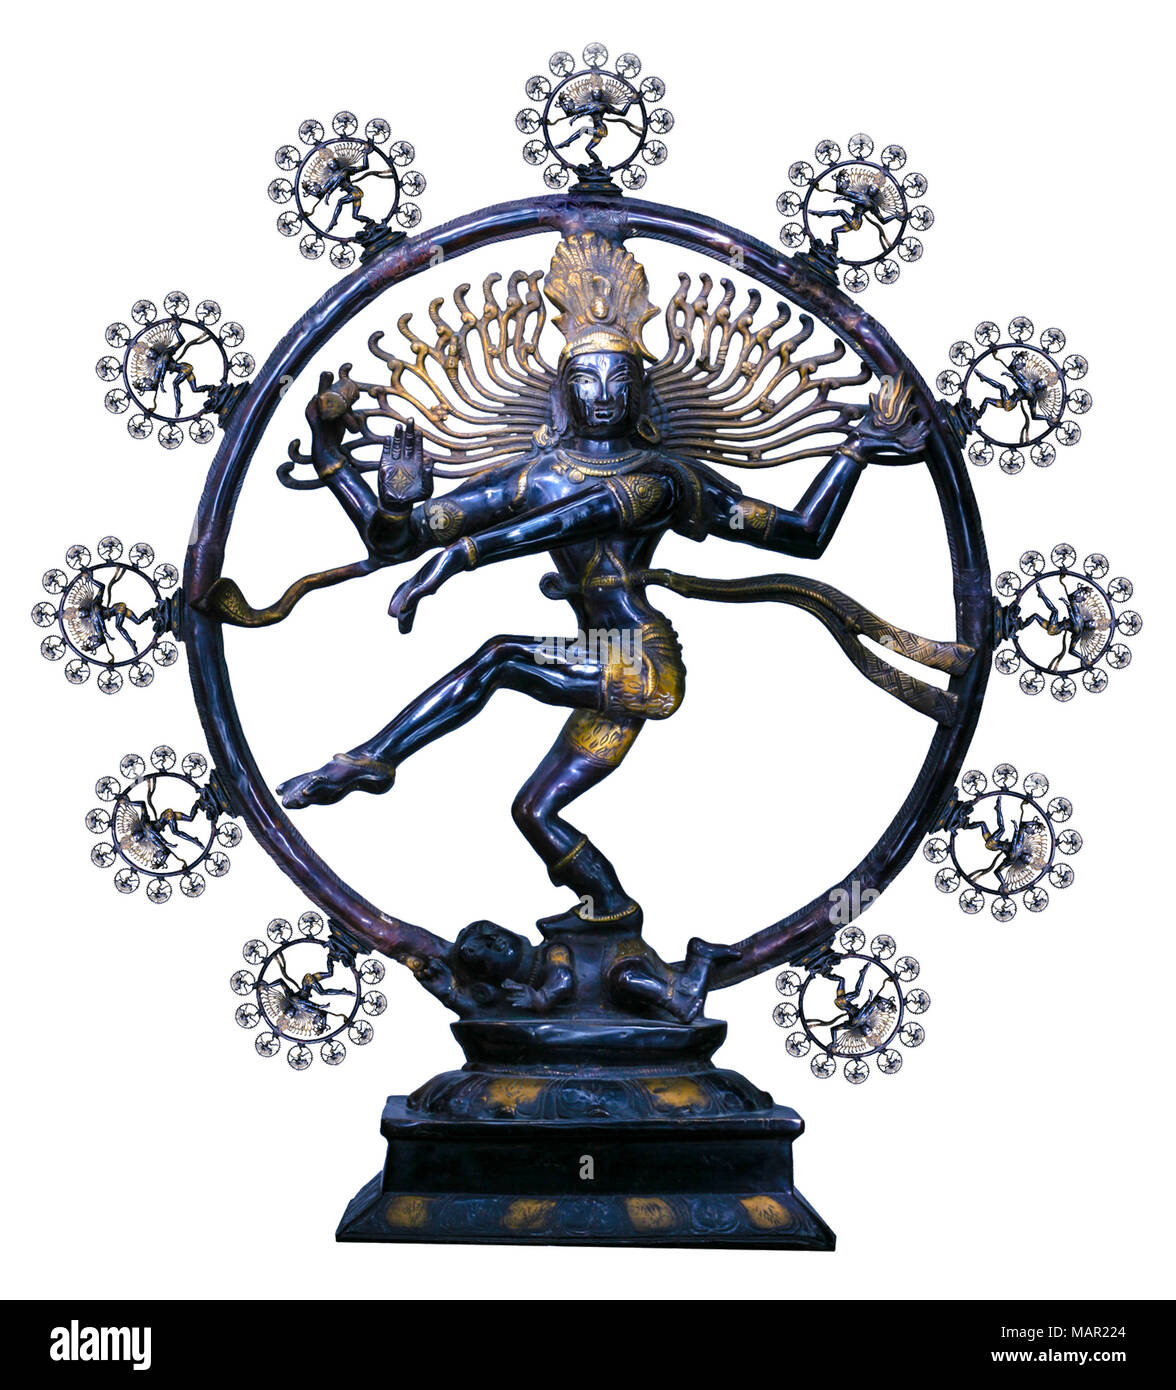 What is the Science Behind the Nataraja Statue? - The Jaipur Dialogues